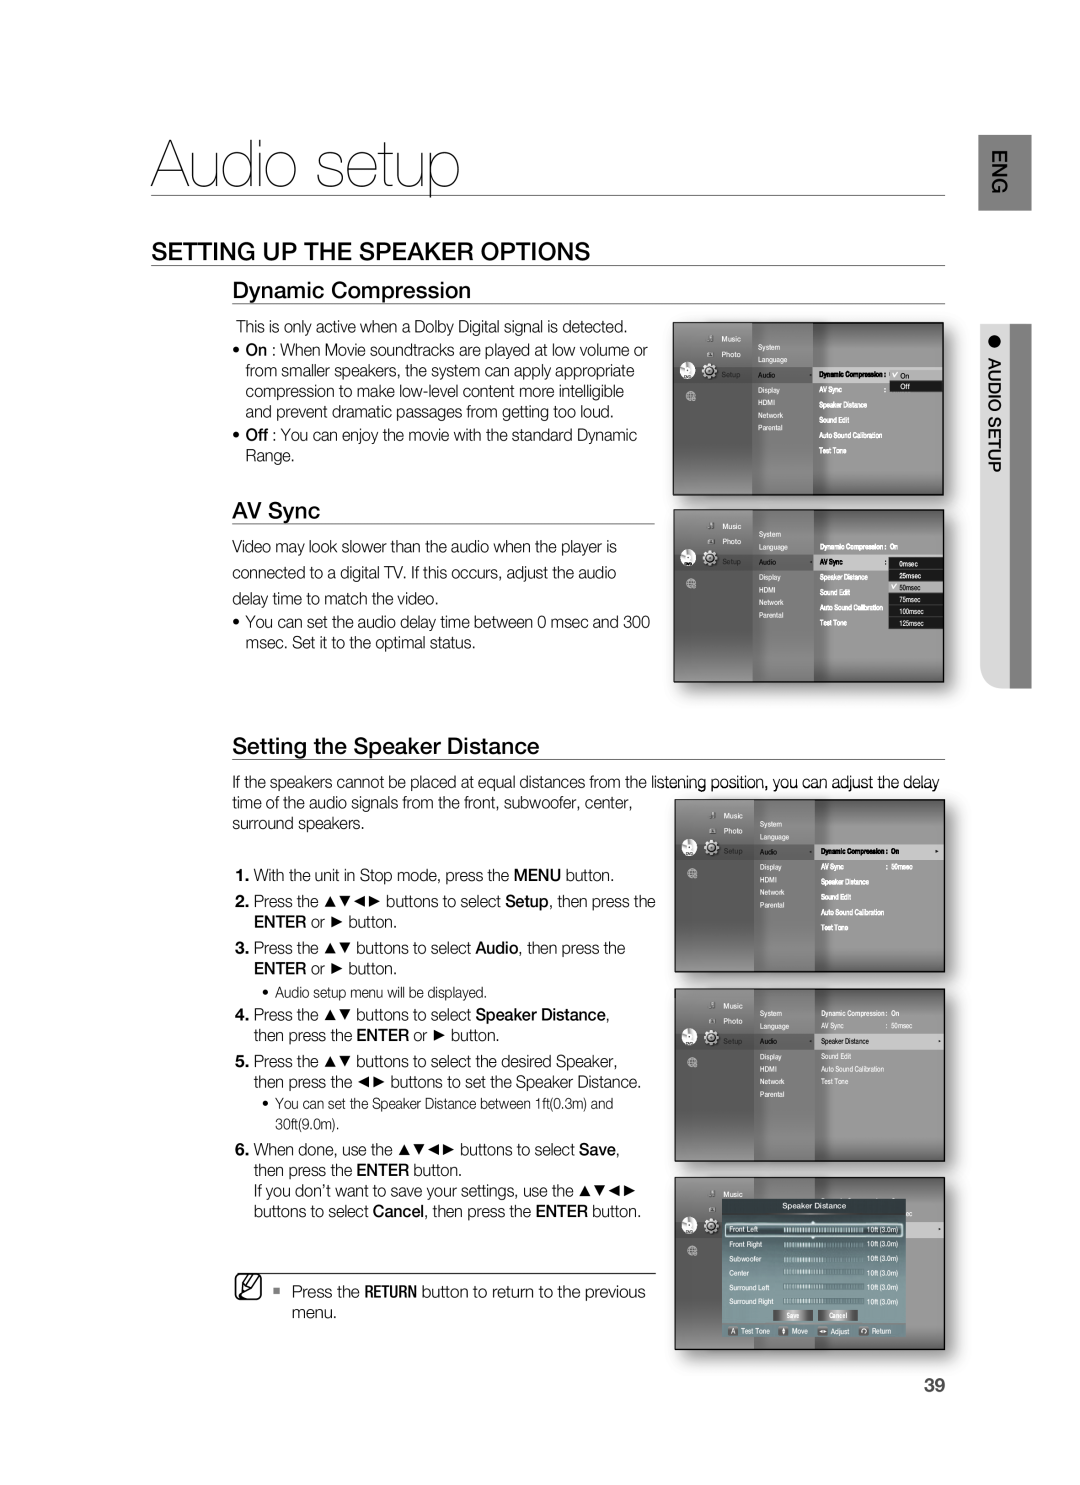 Samsung HT-BD3252A Audio setup, Setting Up The Speaker Options, Dynamic Compression, AV Sync, Setting the Speaker Distance 